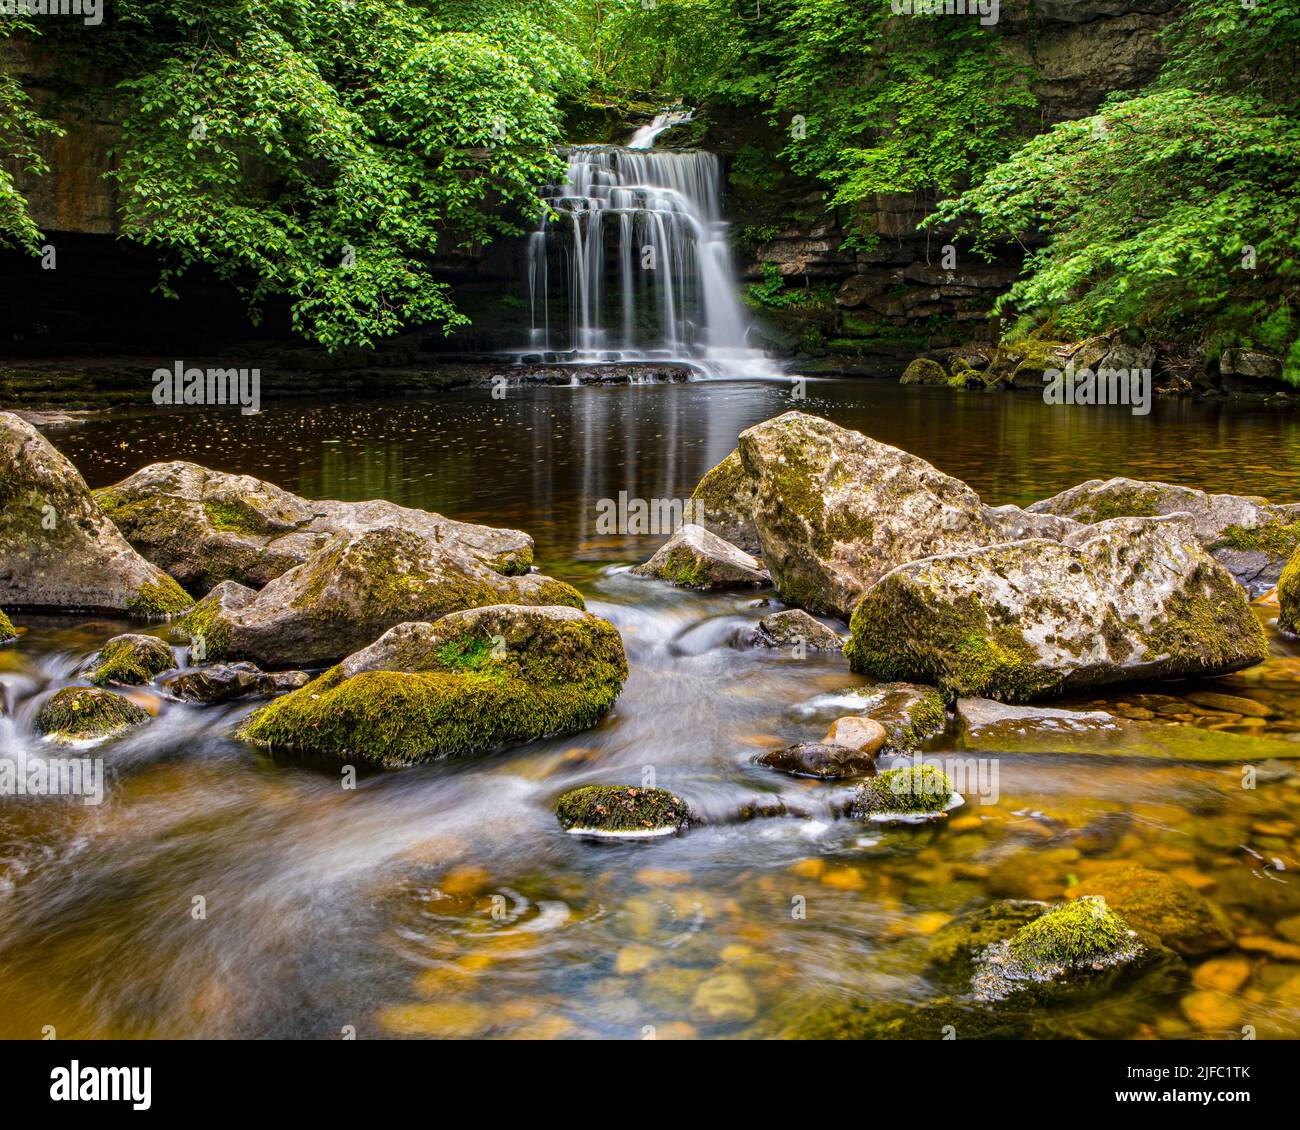 The stunning Cauldron Falls, also known as West Burton Falls in the village of West Burton in the Yorkshire Dales, UK. Stock Photo